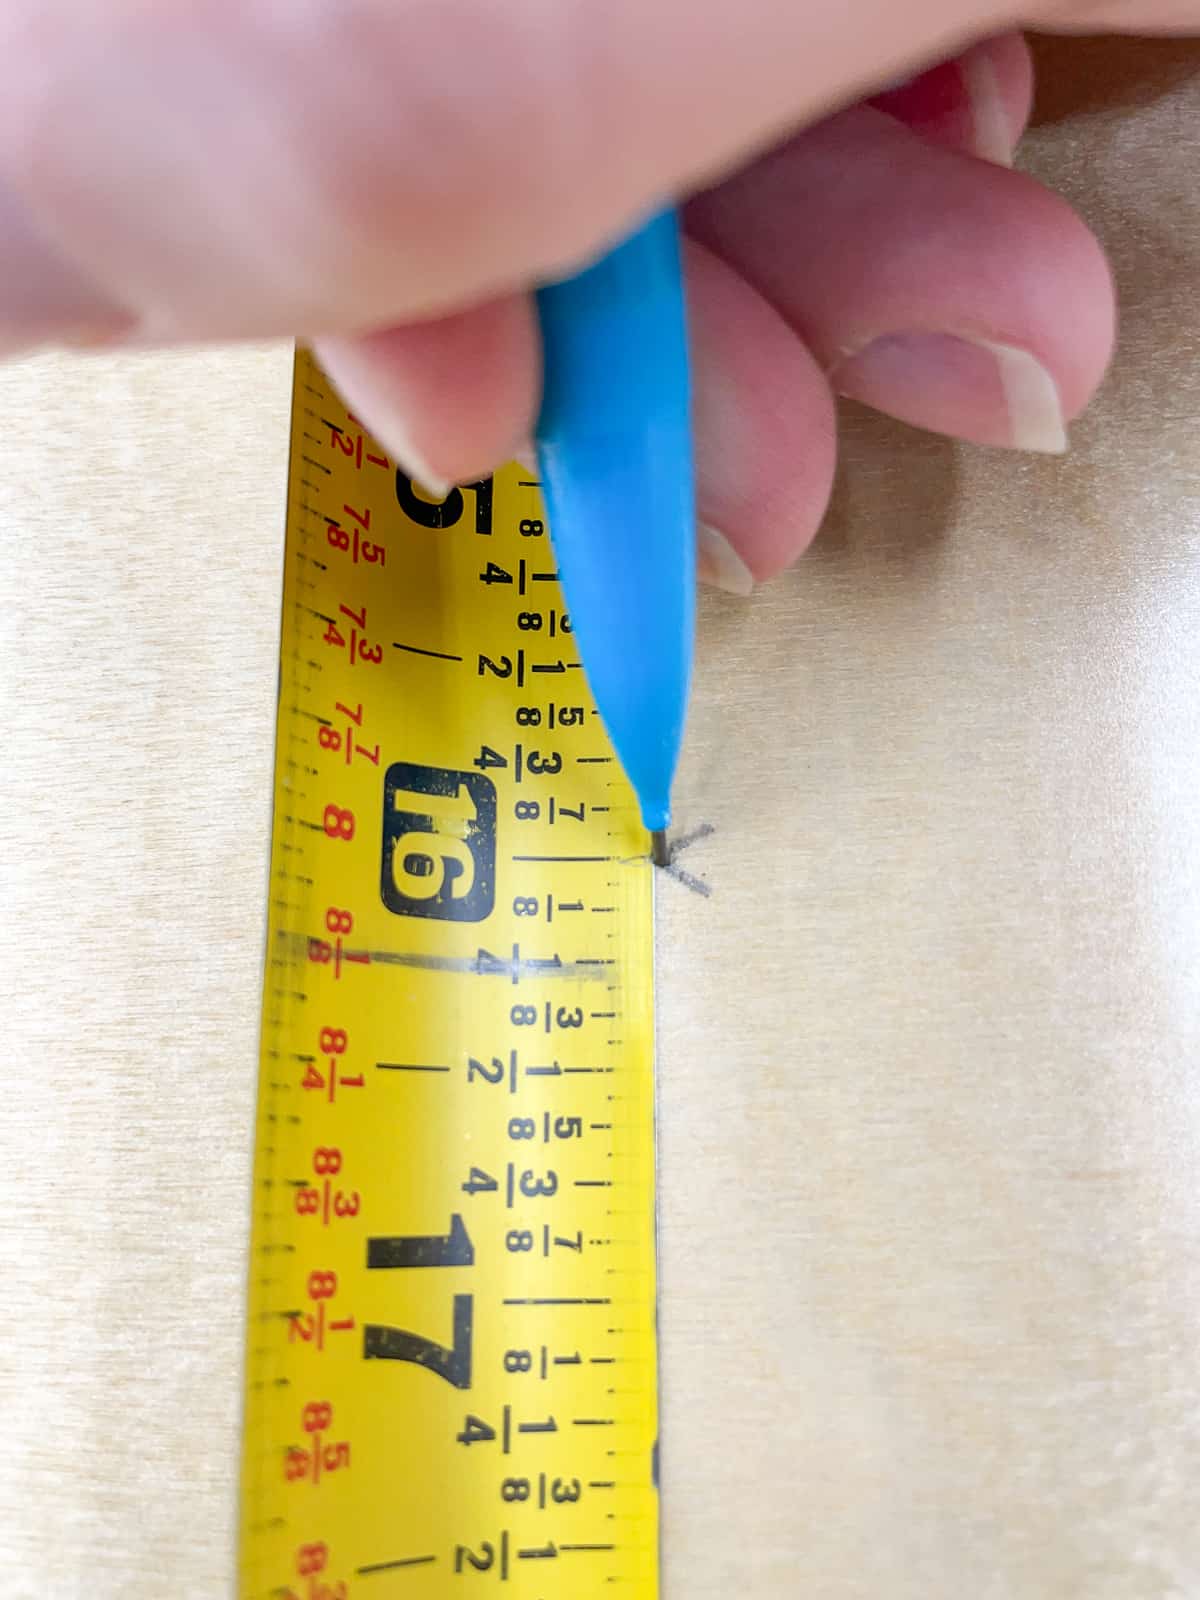 marking 16" on a tape measure with a V